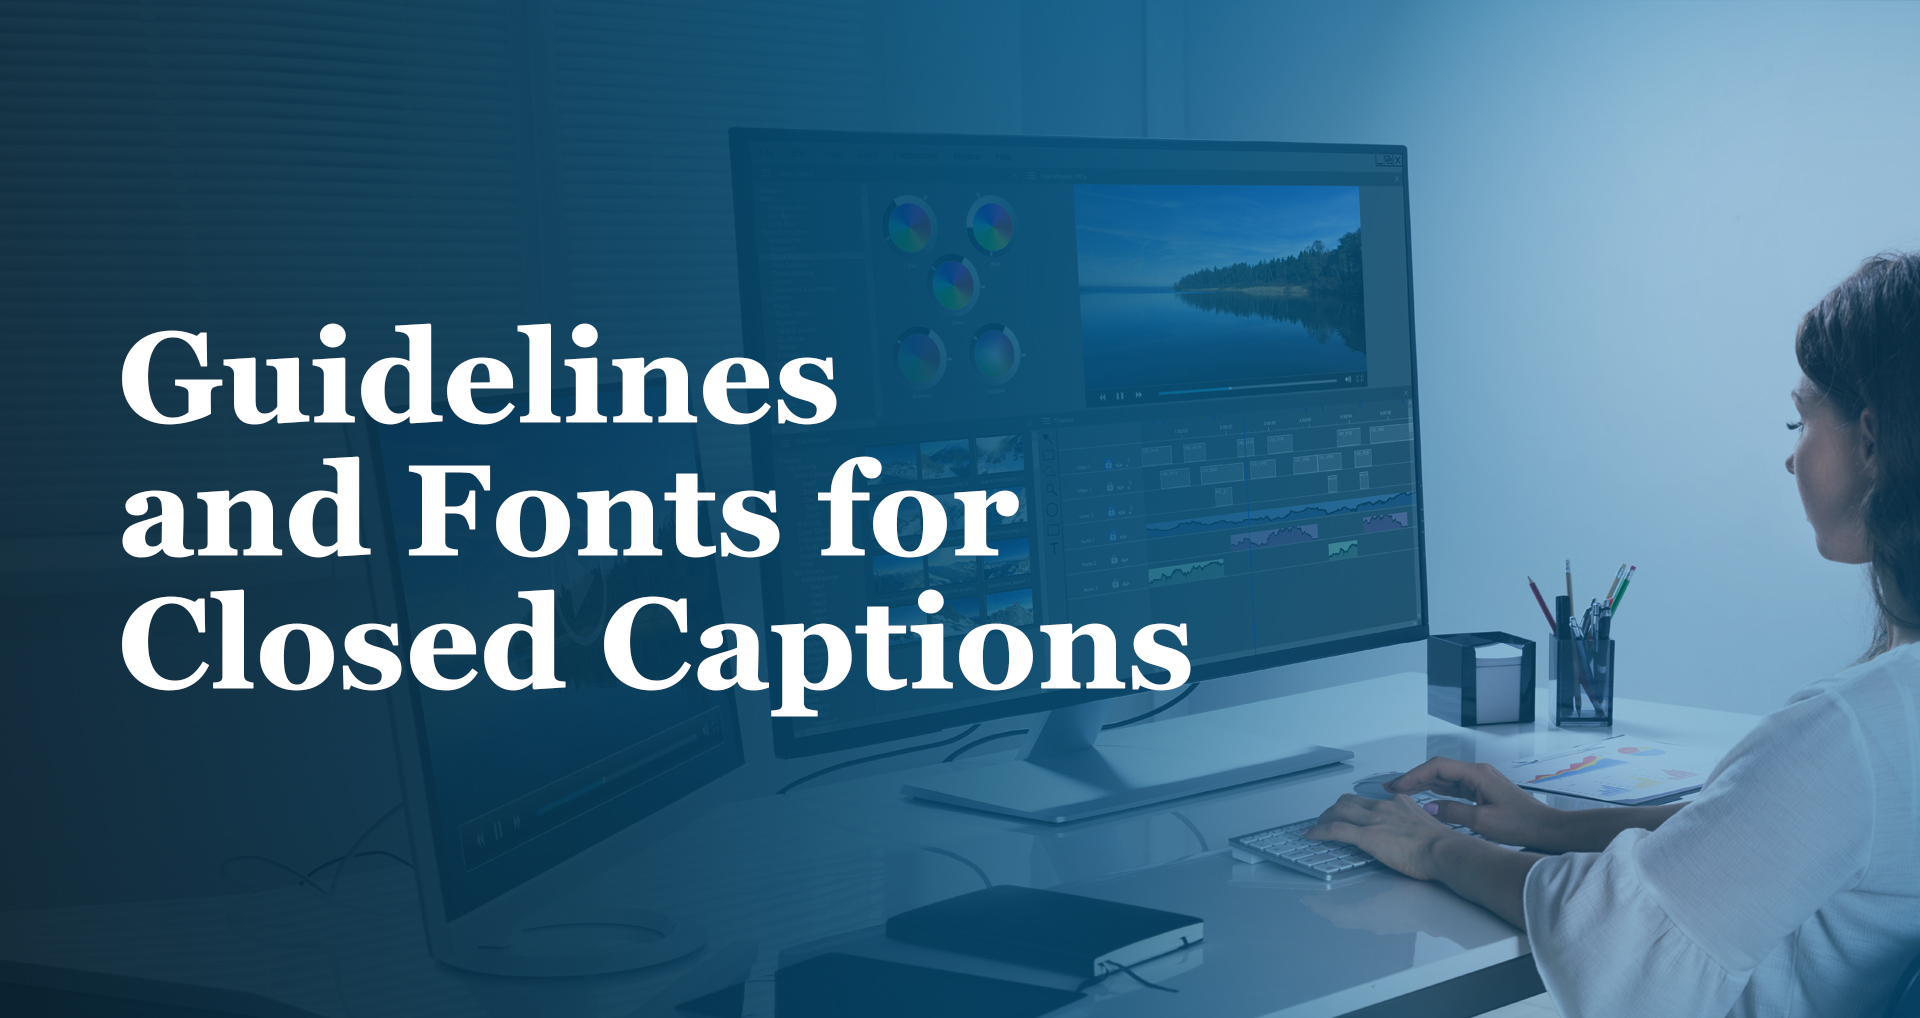 Guidelines and Fonts for Closed Captions